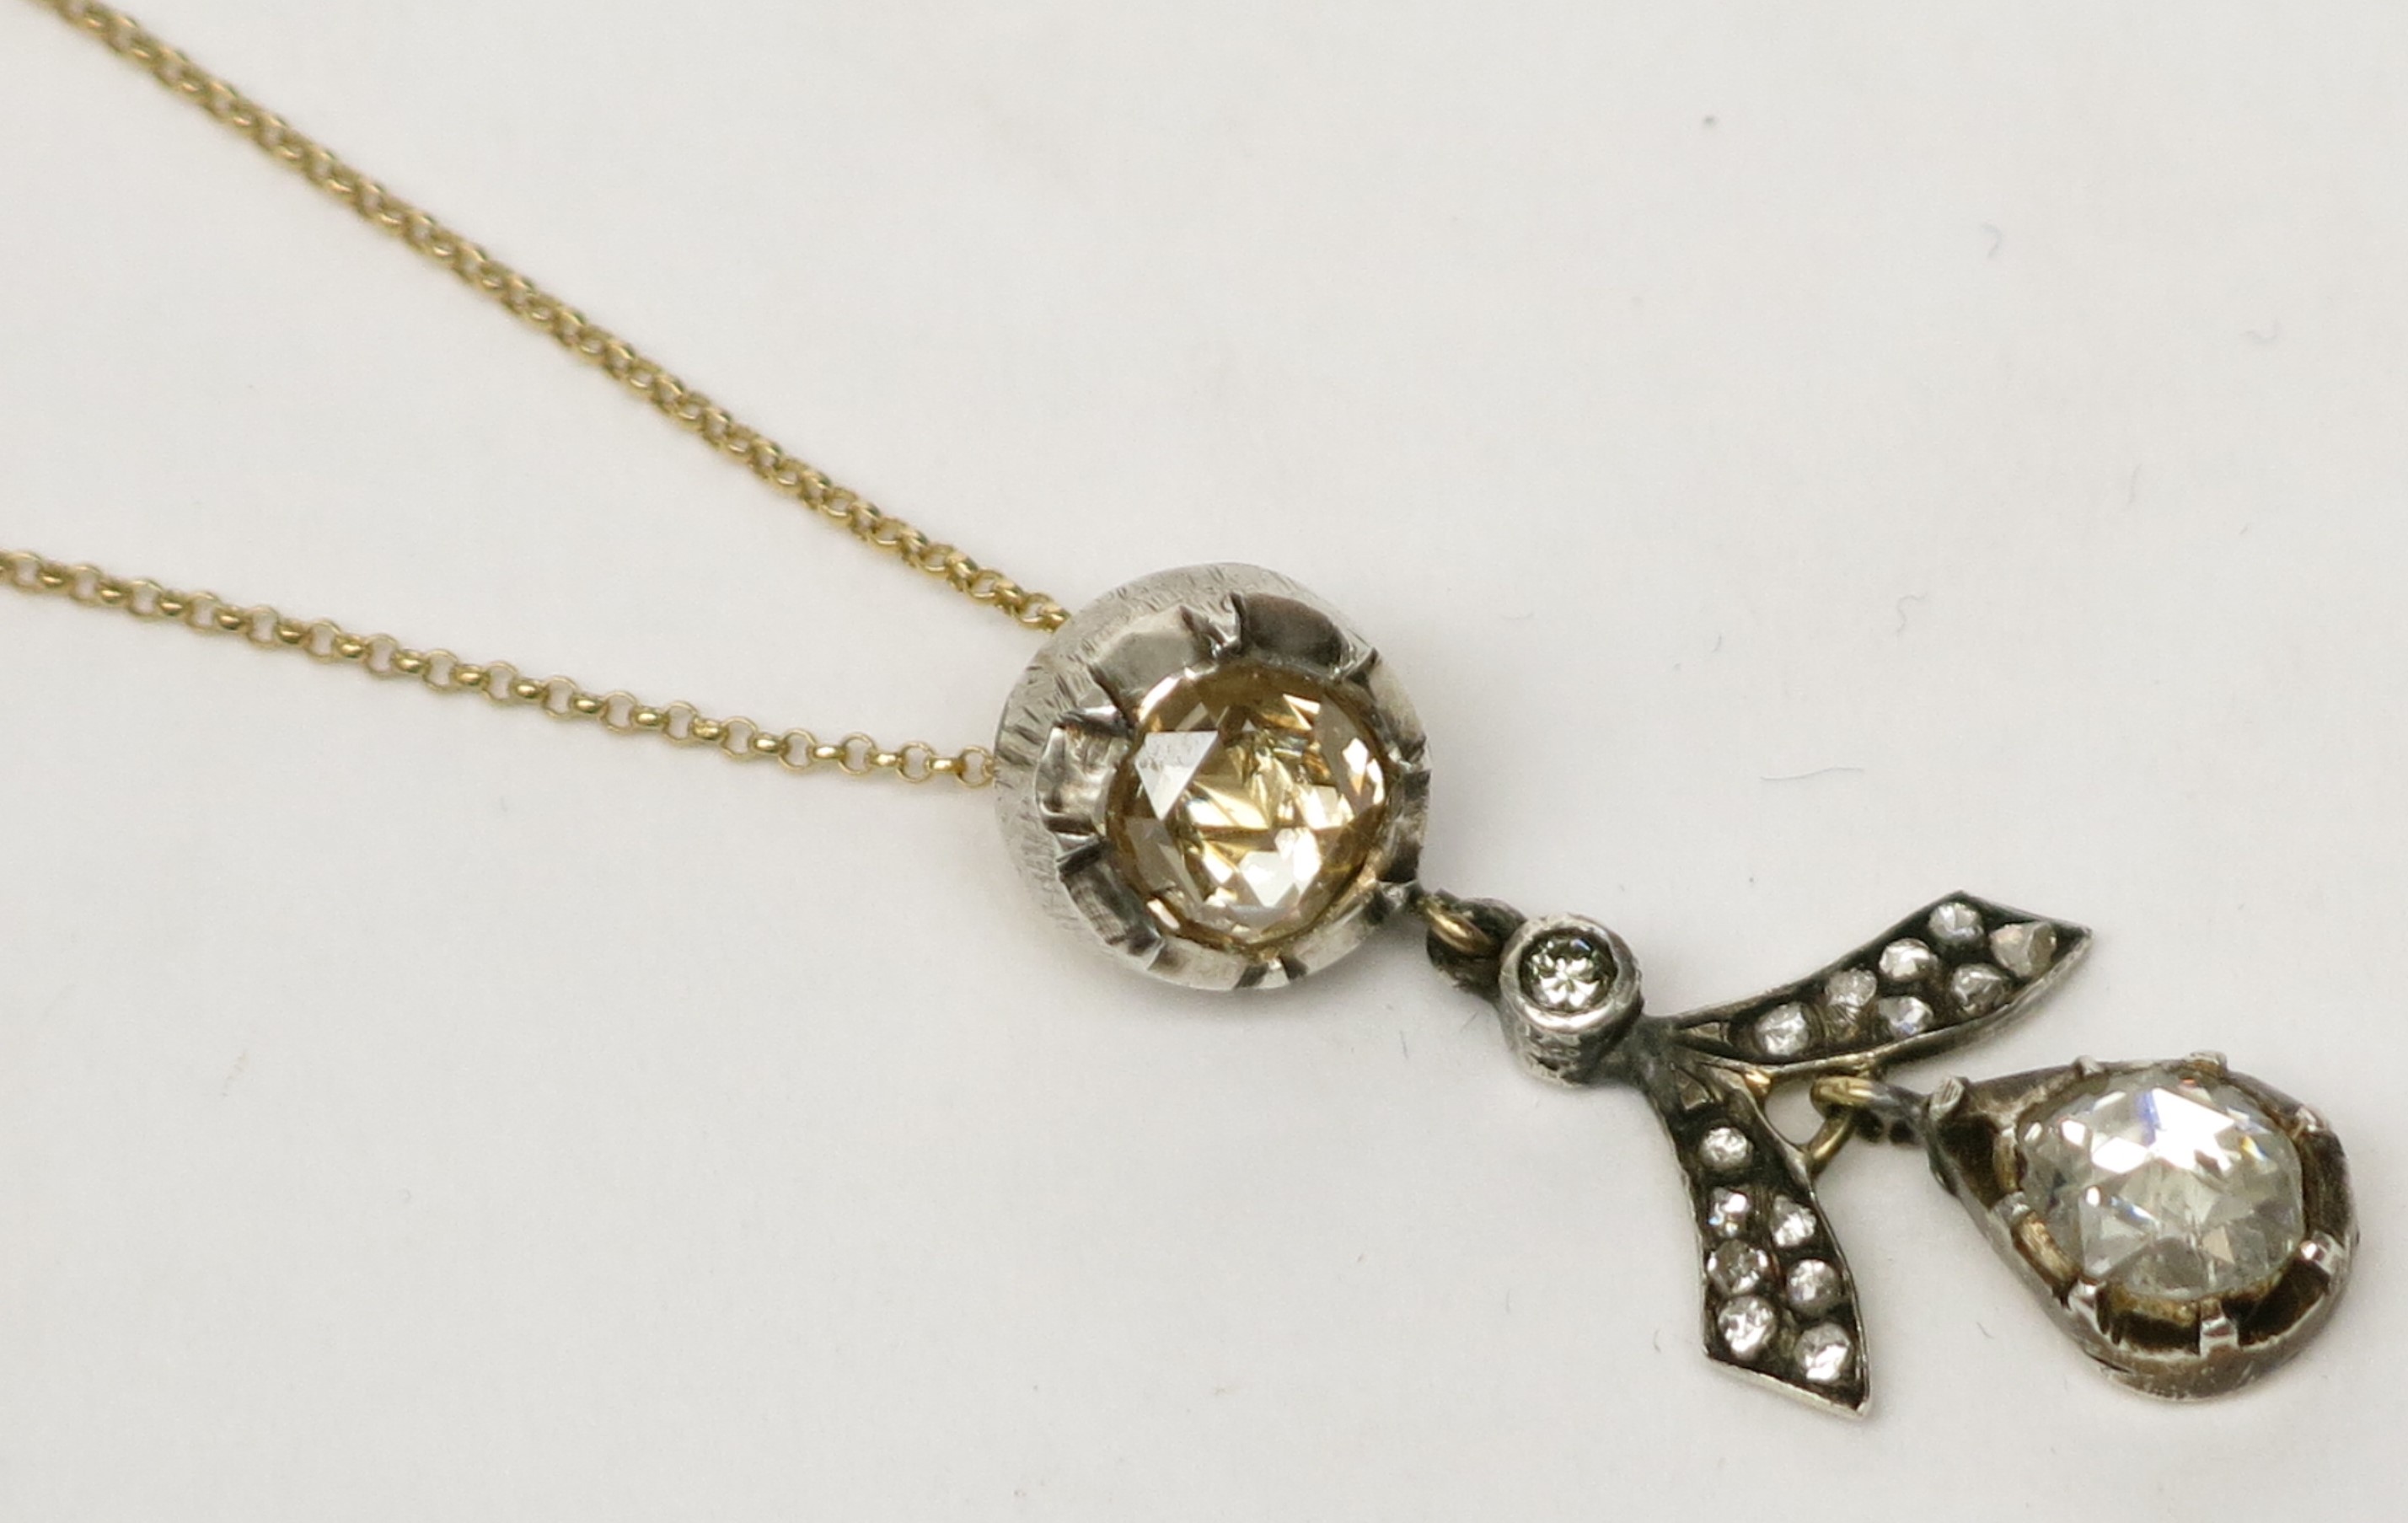 An impressive diamond pendant from a yellow old cut stone of approximately 1ct hangs a stylised